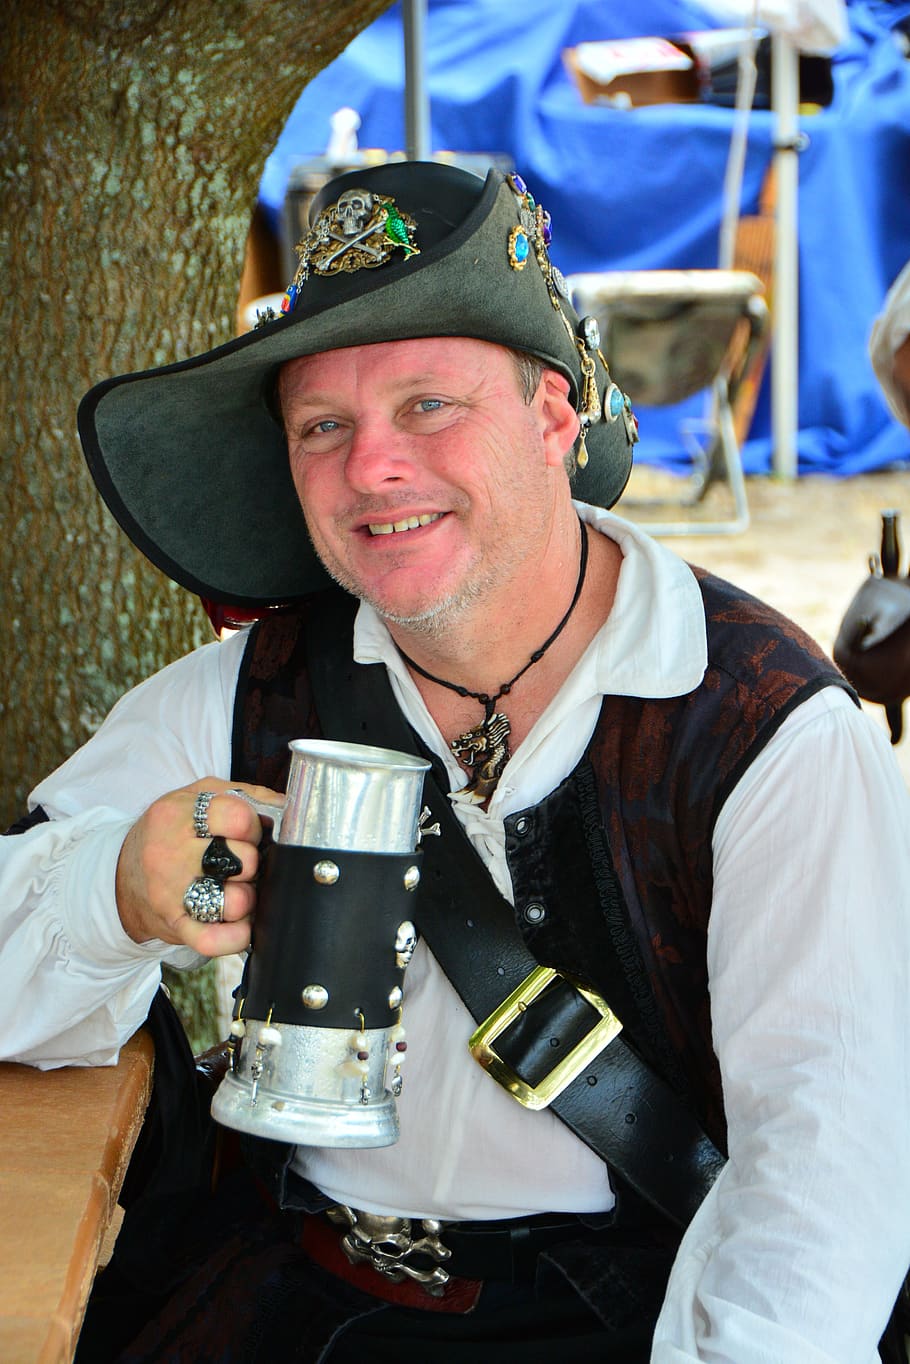 pirate, buccaneer, piracy, hat, nautical, treasure, character, looking at camera, portrait, real people